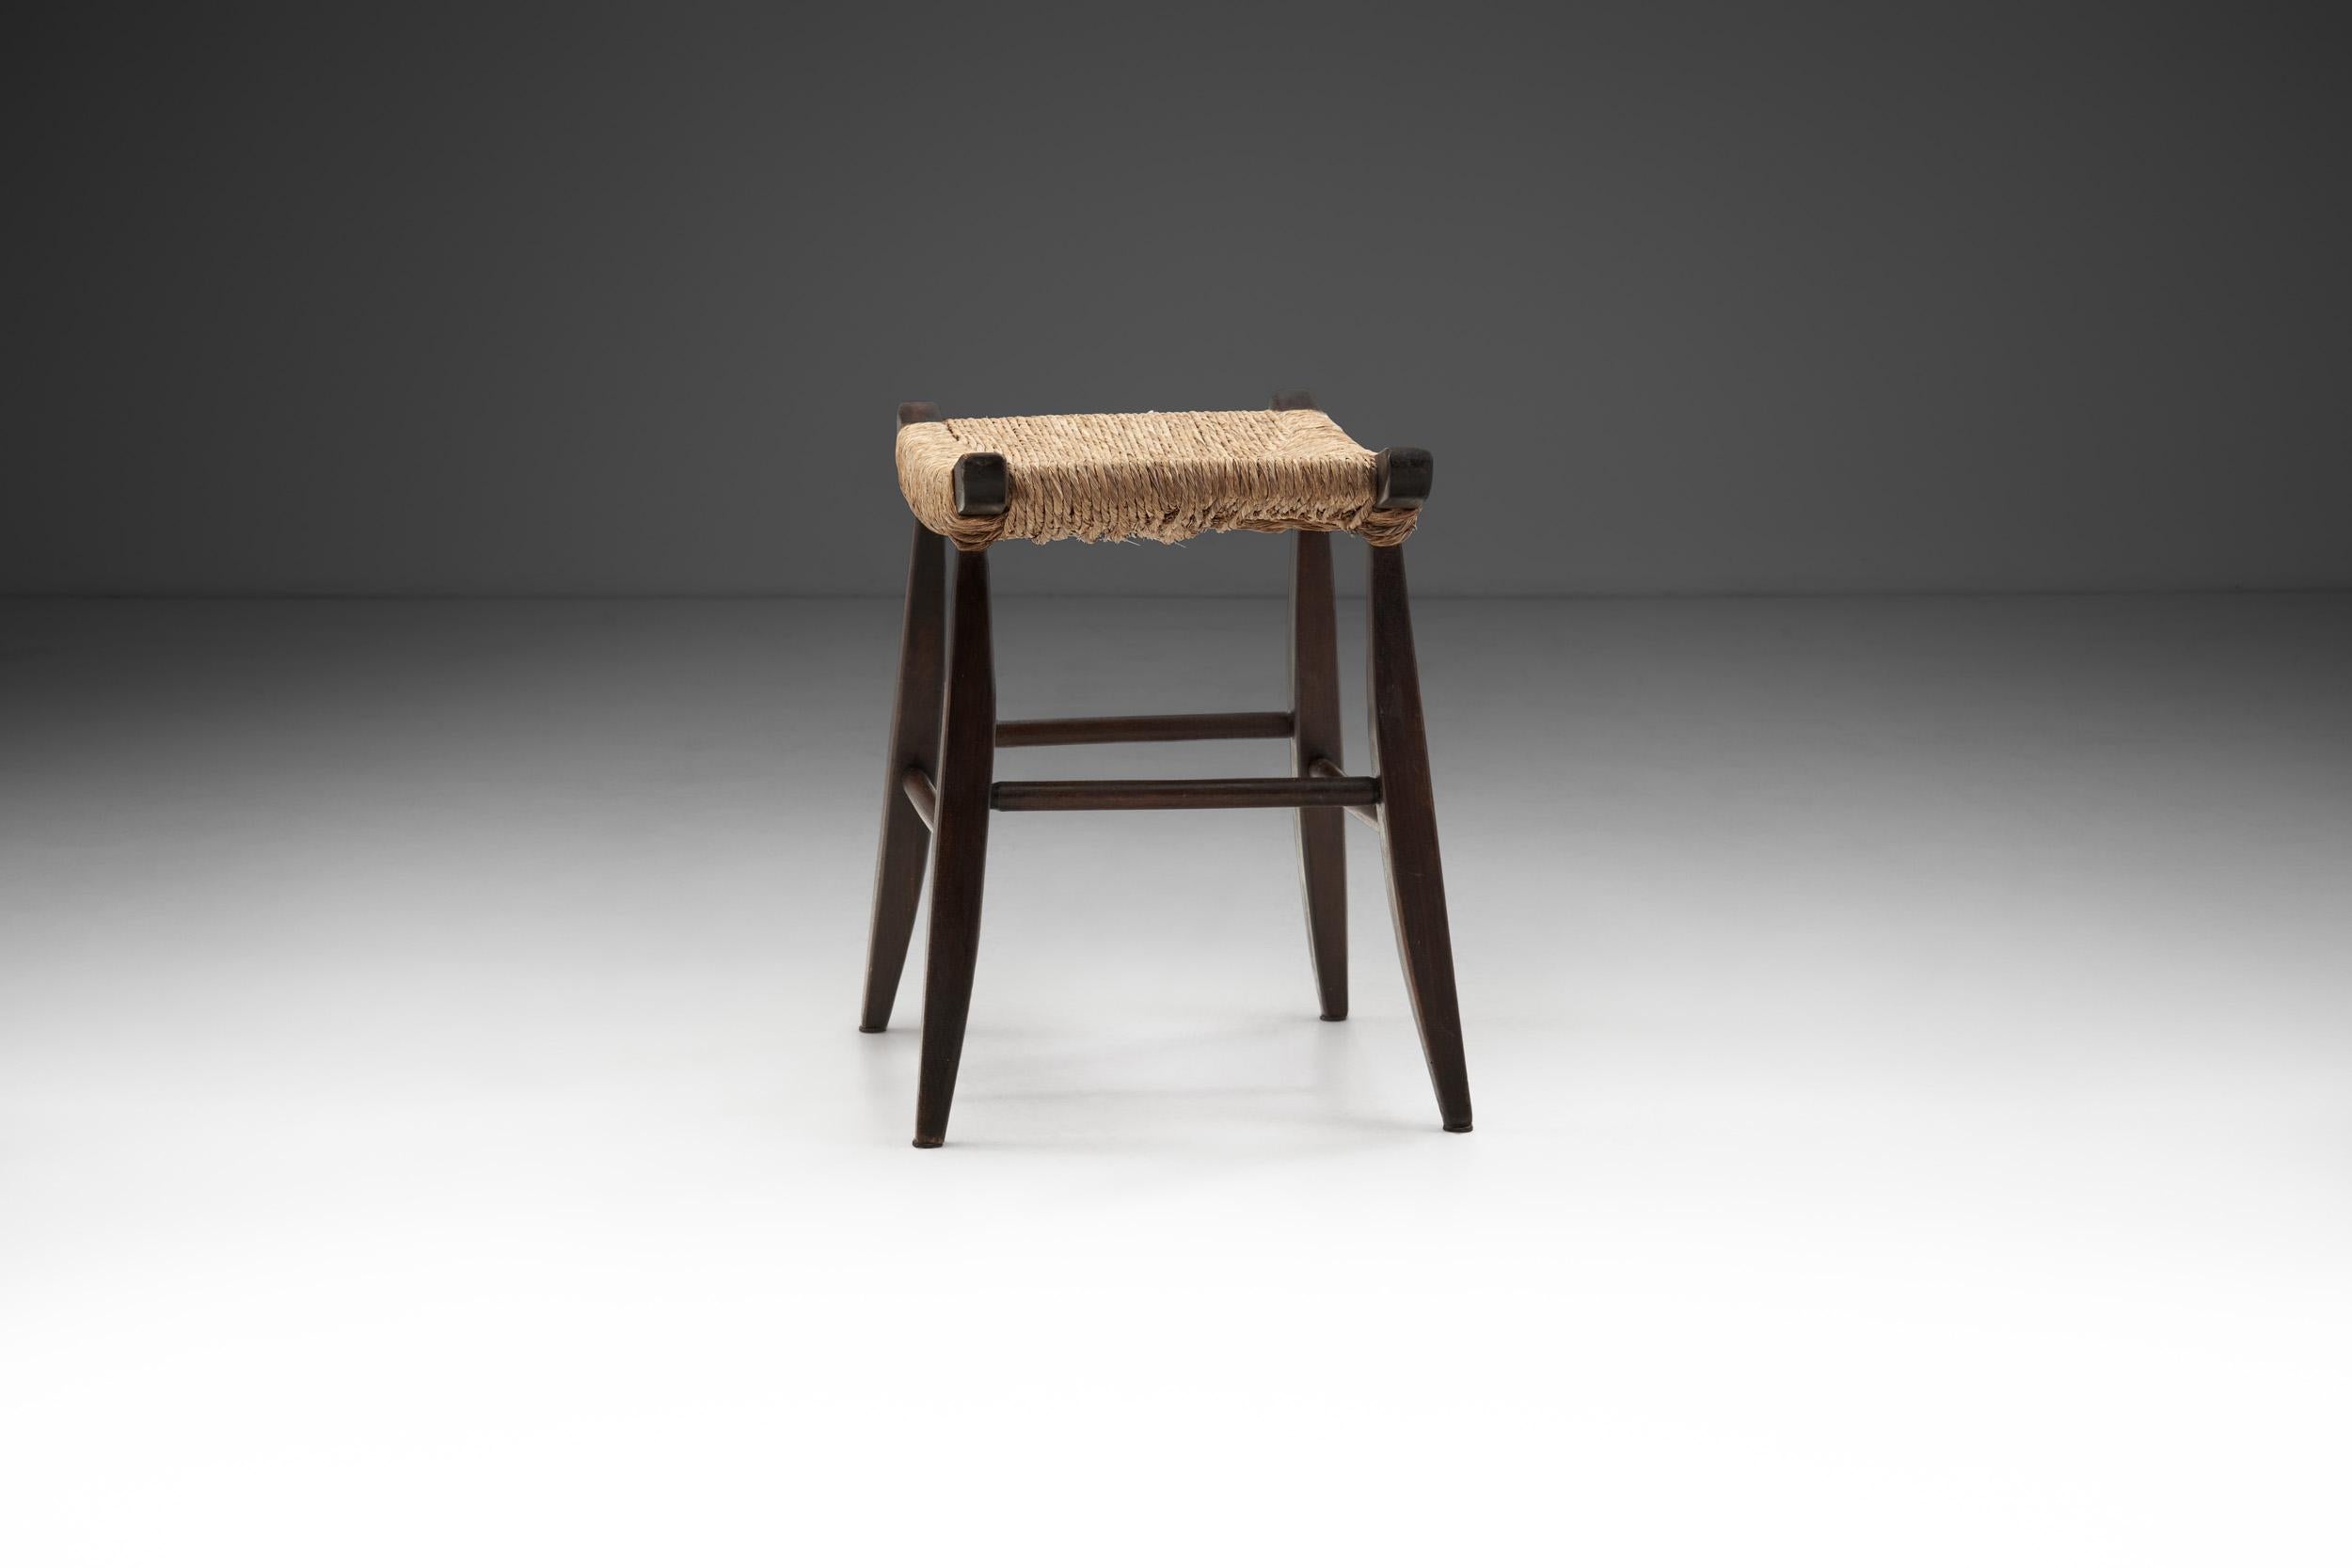 European Midcentury Papercord and Dark Stained Wood Stool, Europe Ca 1960s